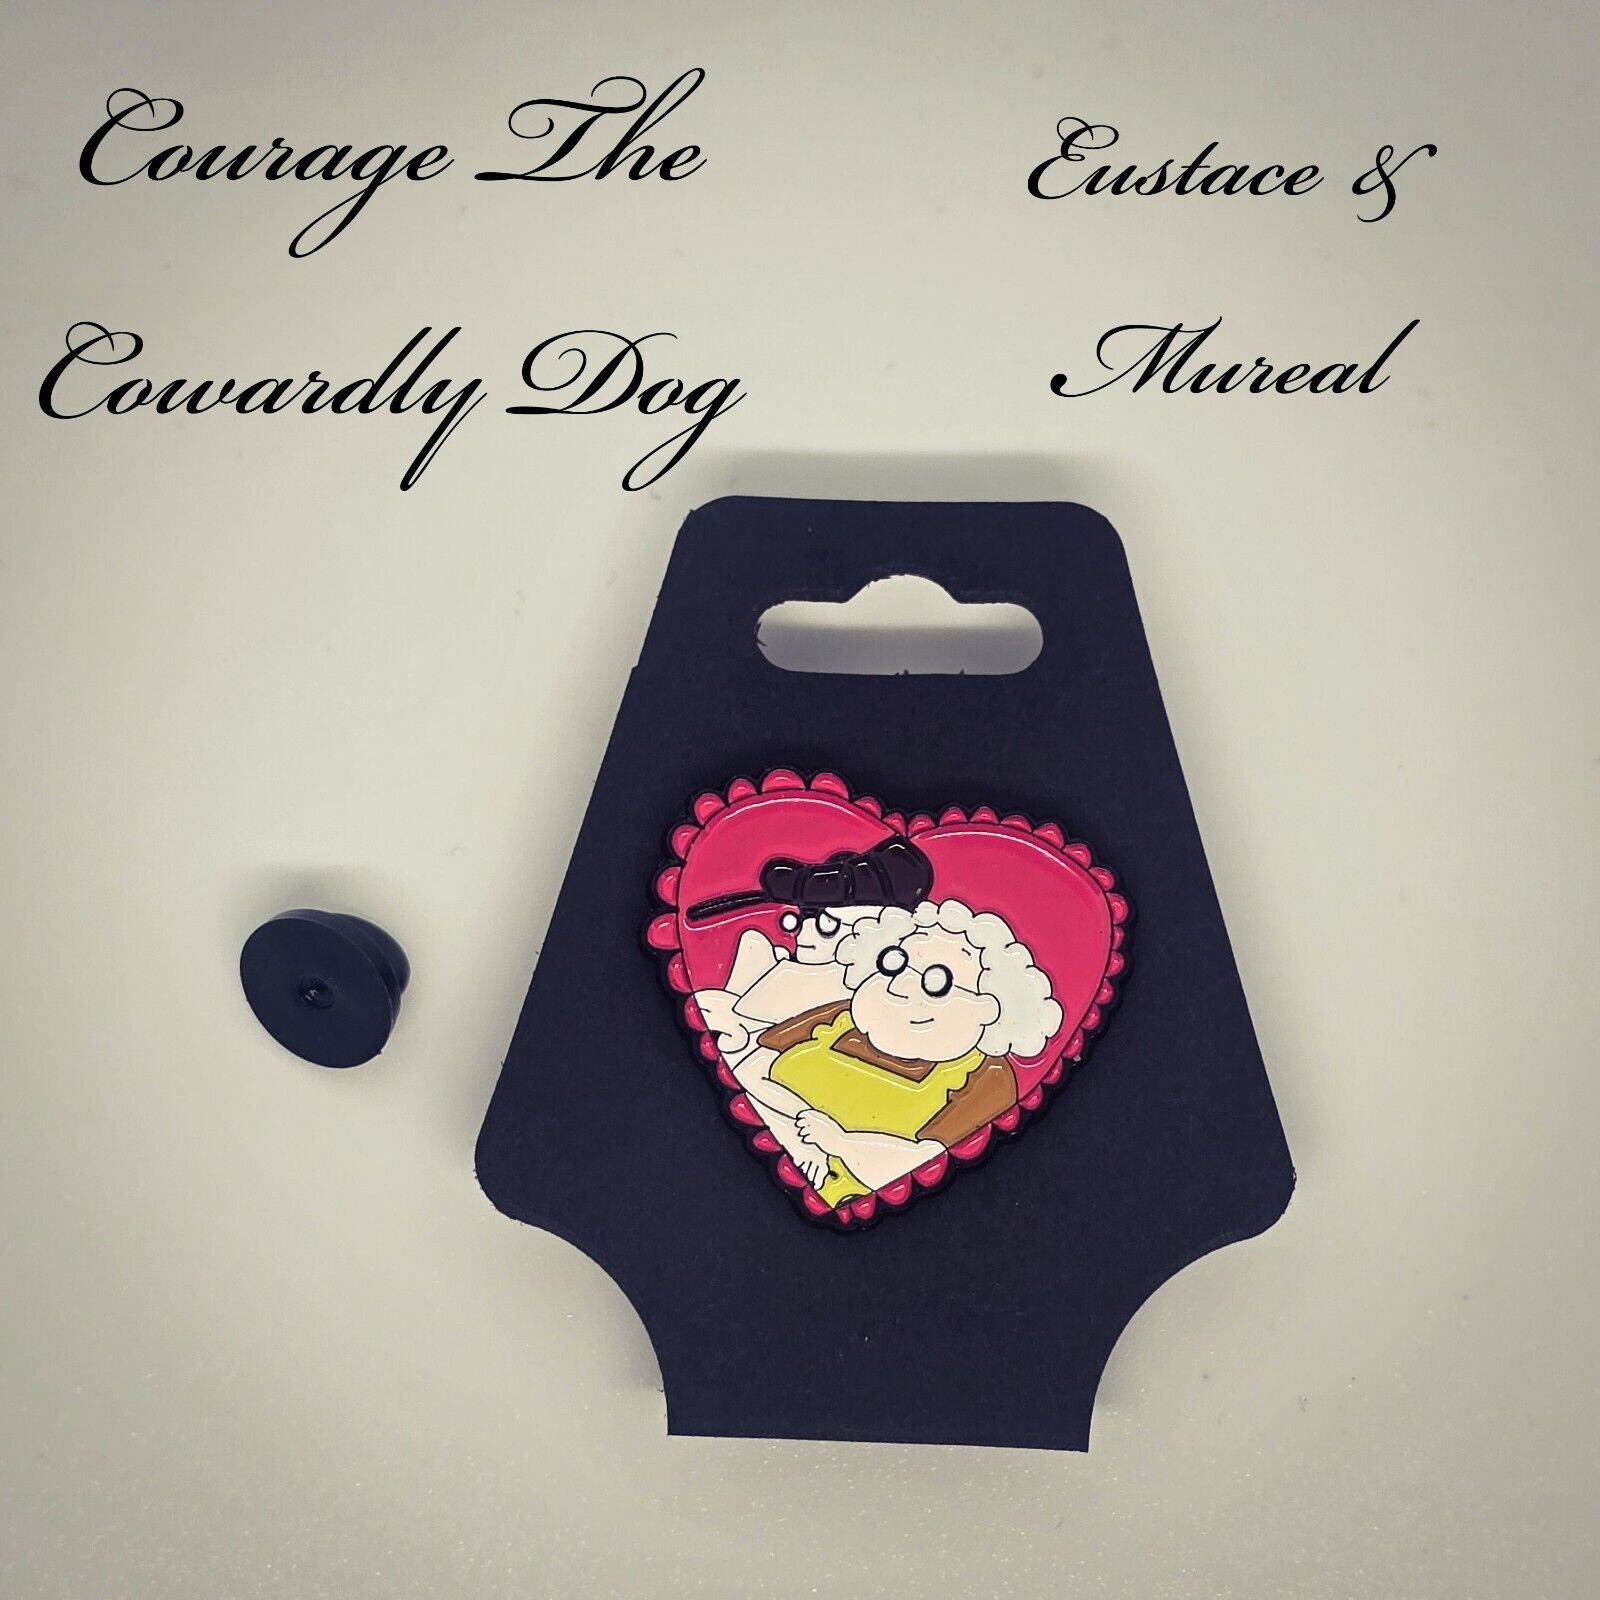 Courage The Cowardly Dog Character Pin,Broach Pendant, Replacement Back Included